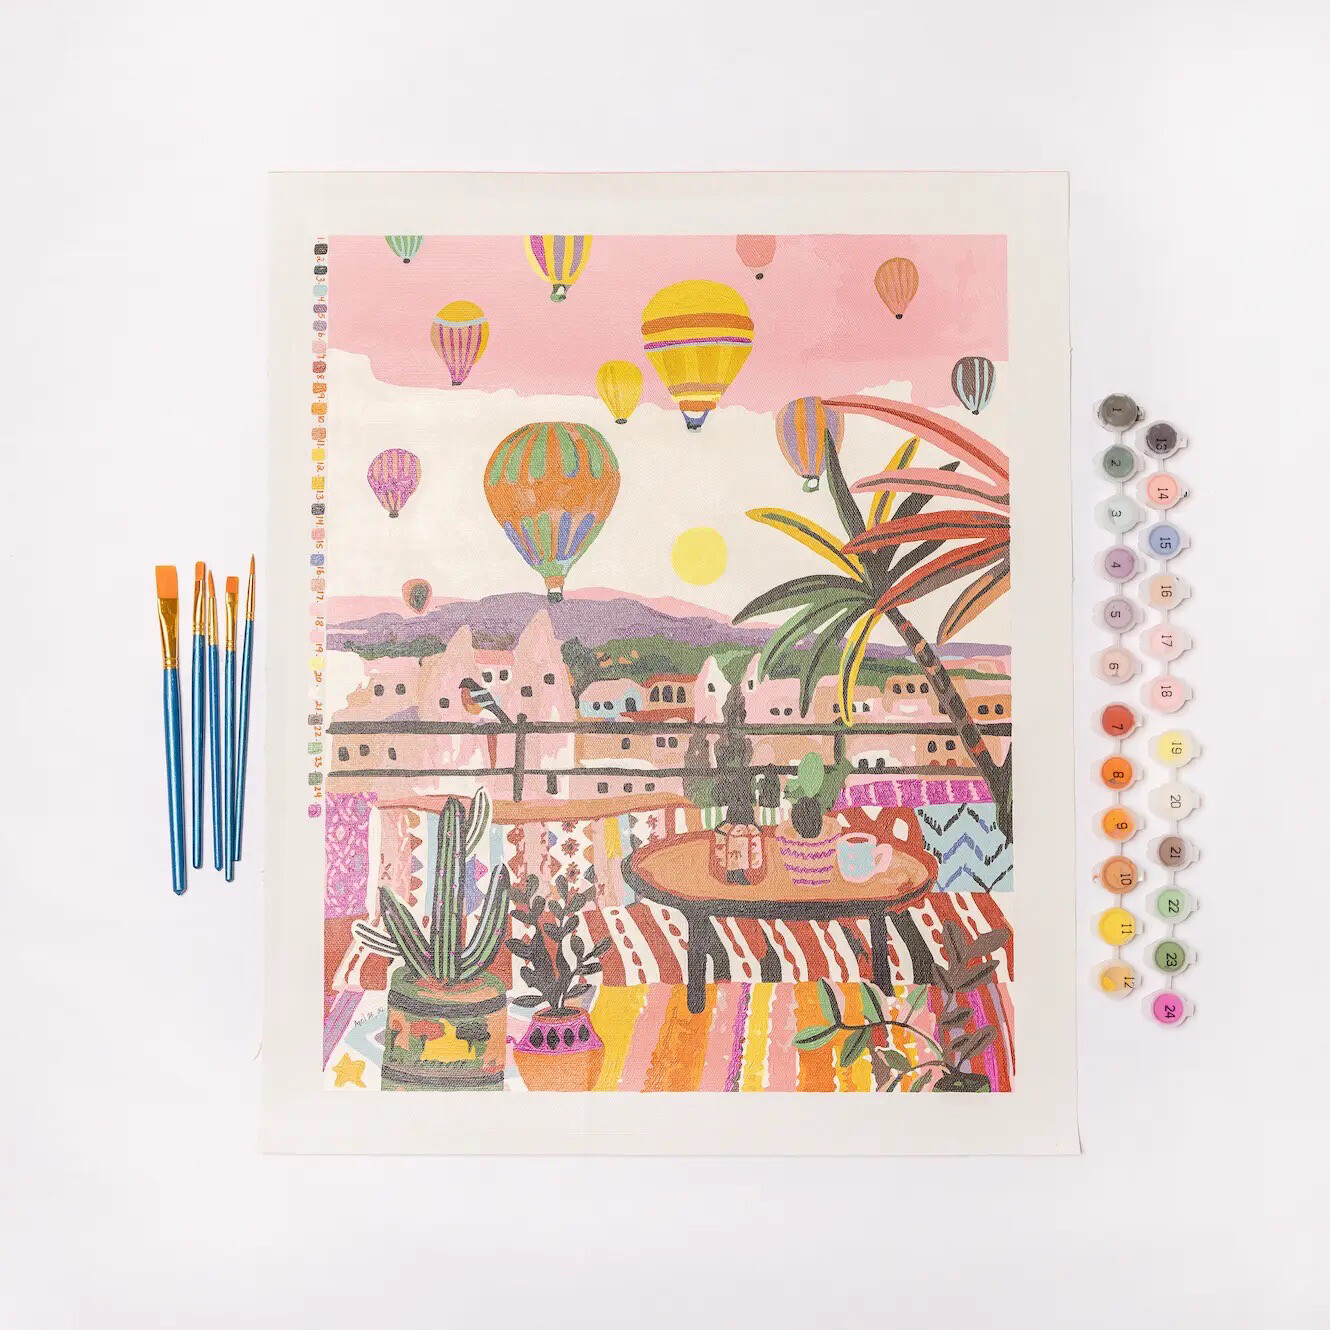 Cappadocia Hot Air Balloons Paint by Number Kit